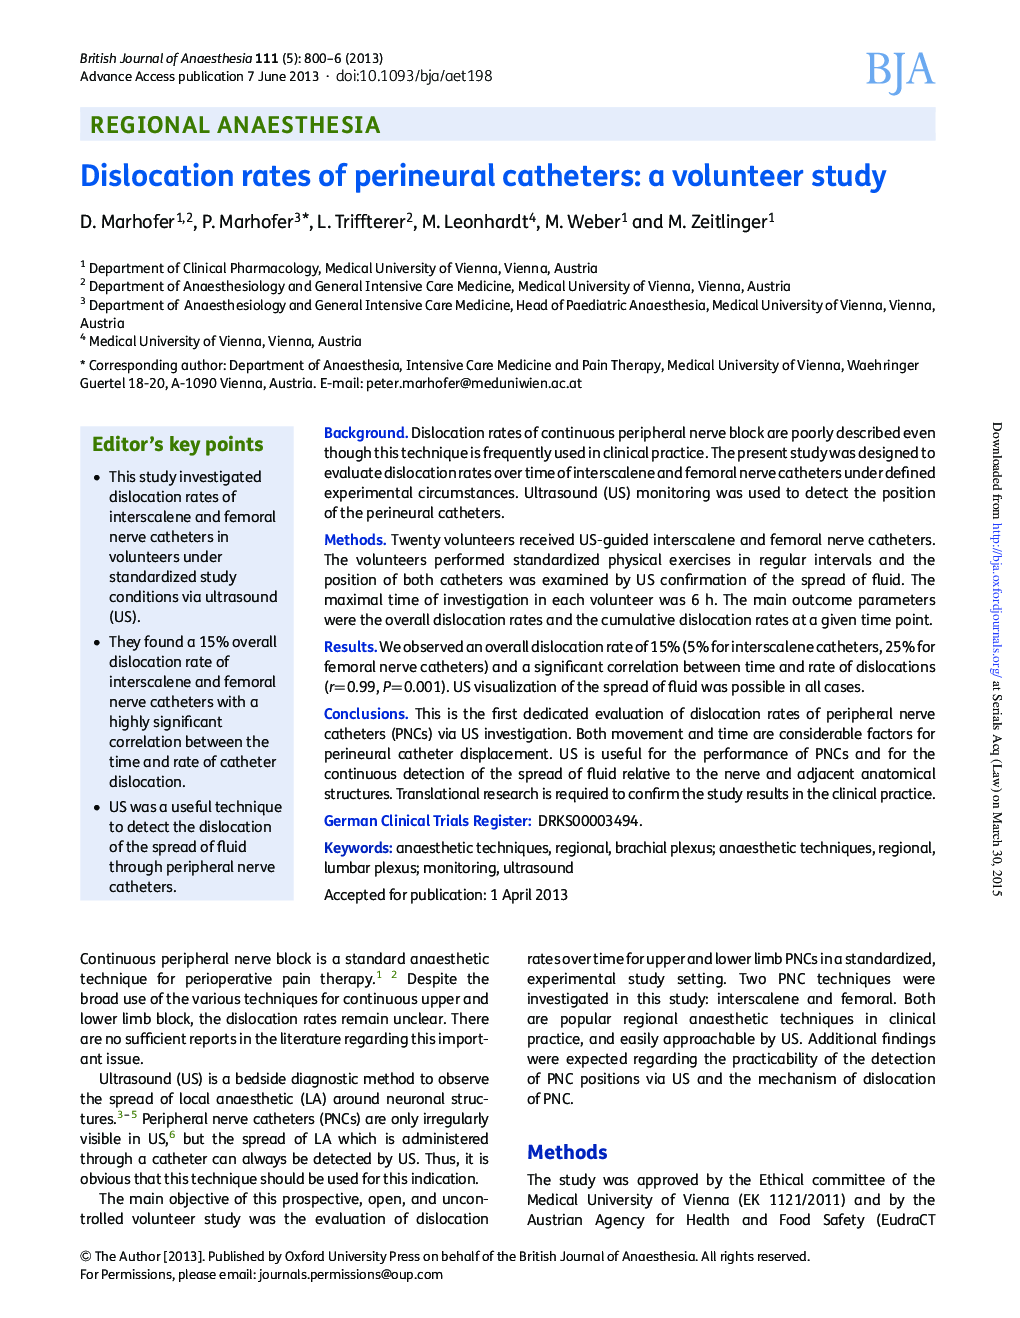 Dislocation rates of perineural catheters: a volunteer study